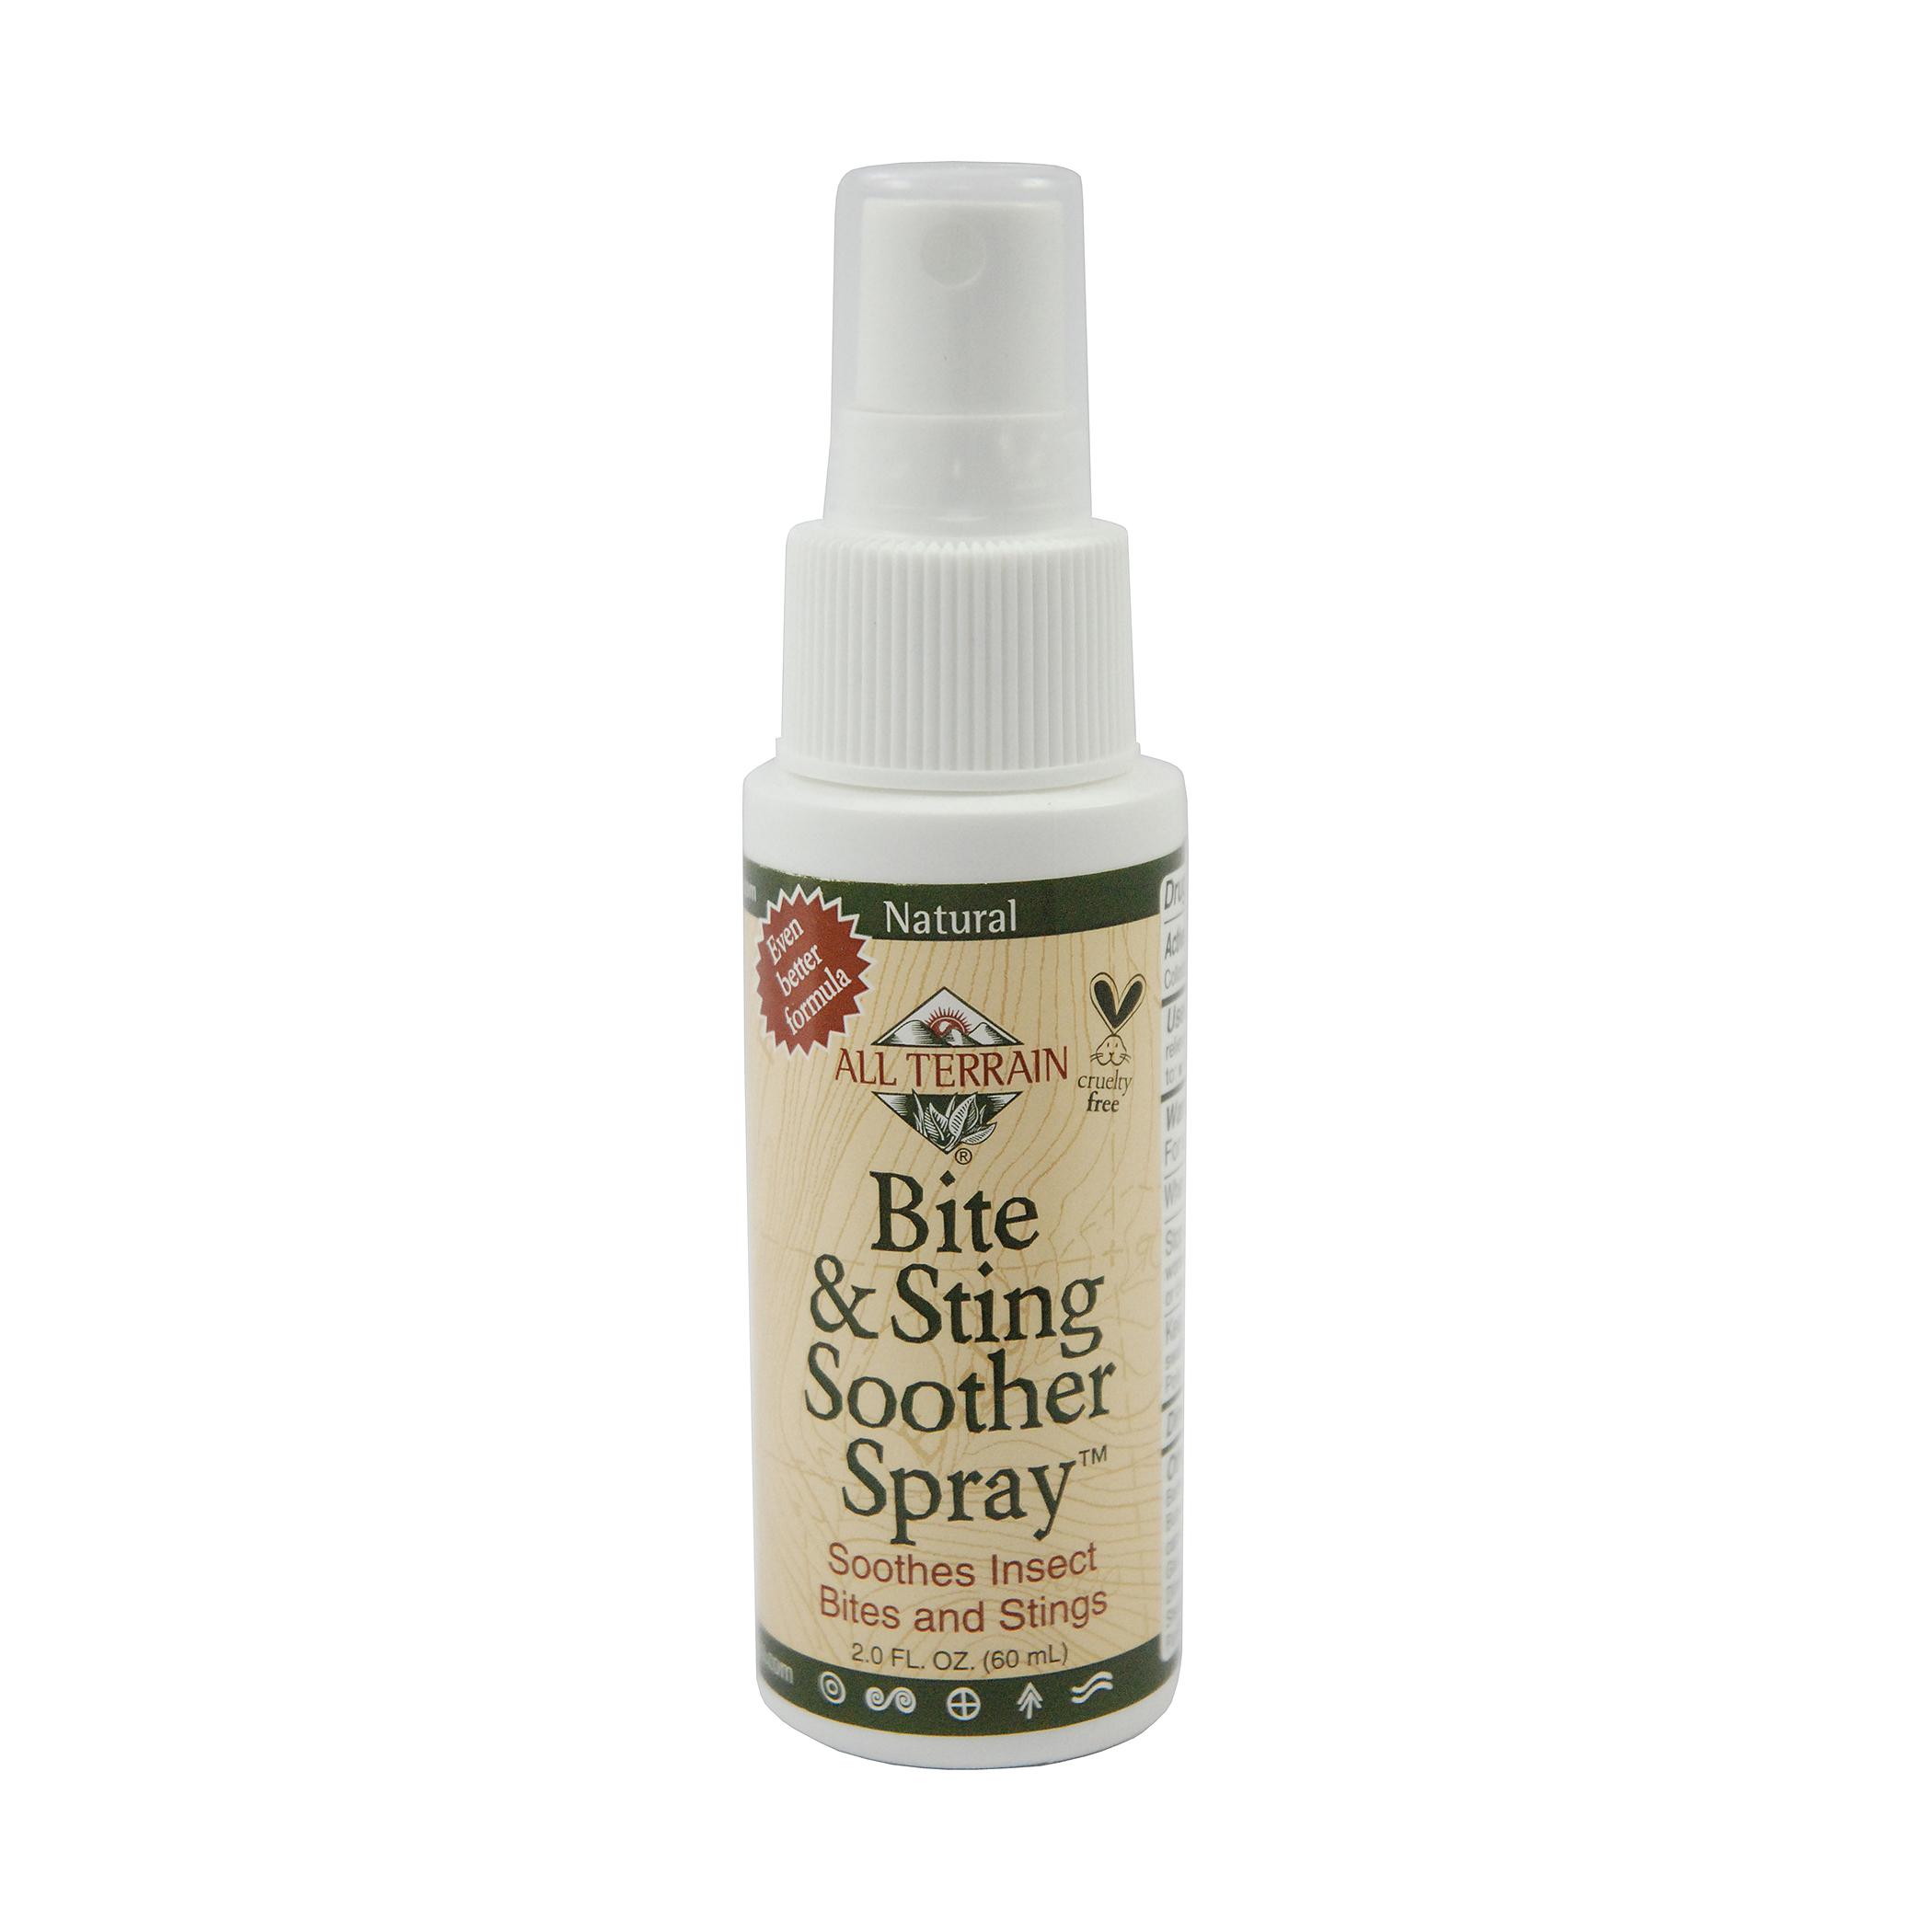  Bite & Sting Soother Spray